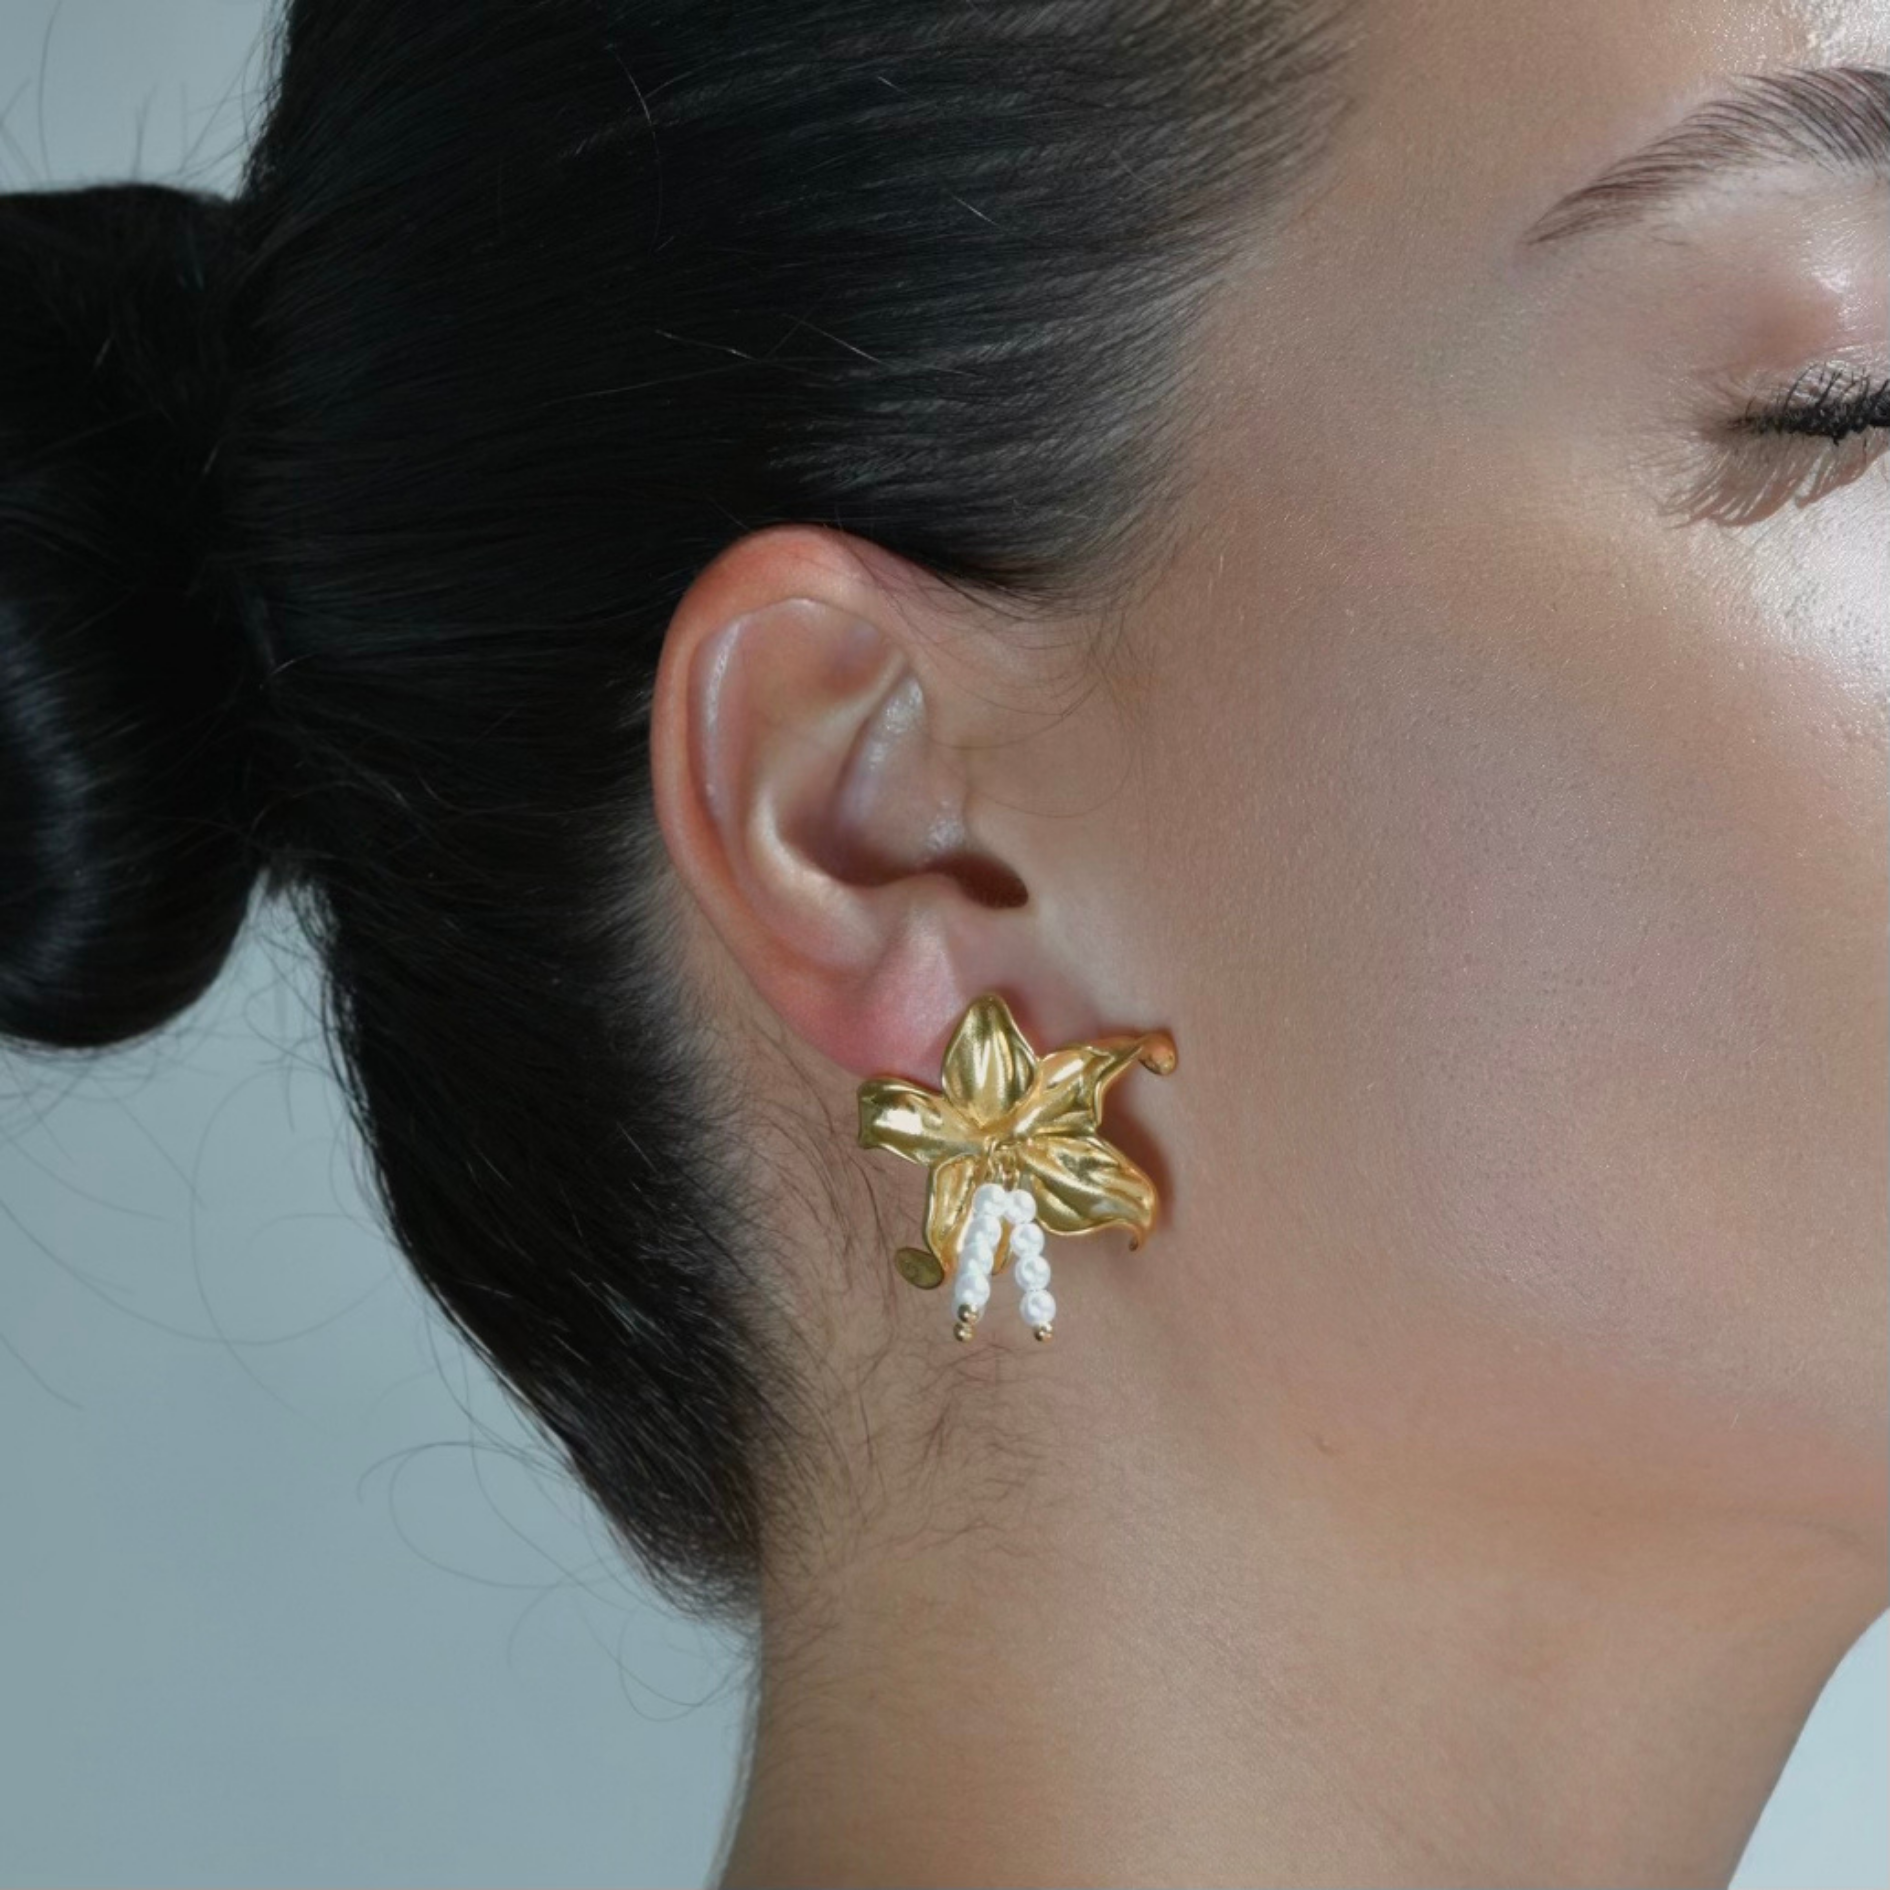 Gold Waterproof Earrings - In the shape of a bllomig Dadoffil Flower whith white pearls in the middle of the flower